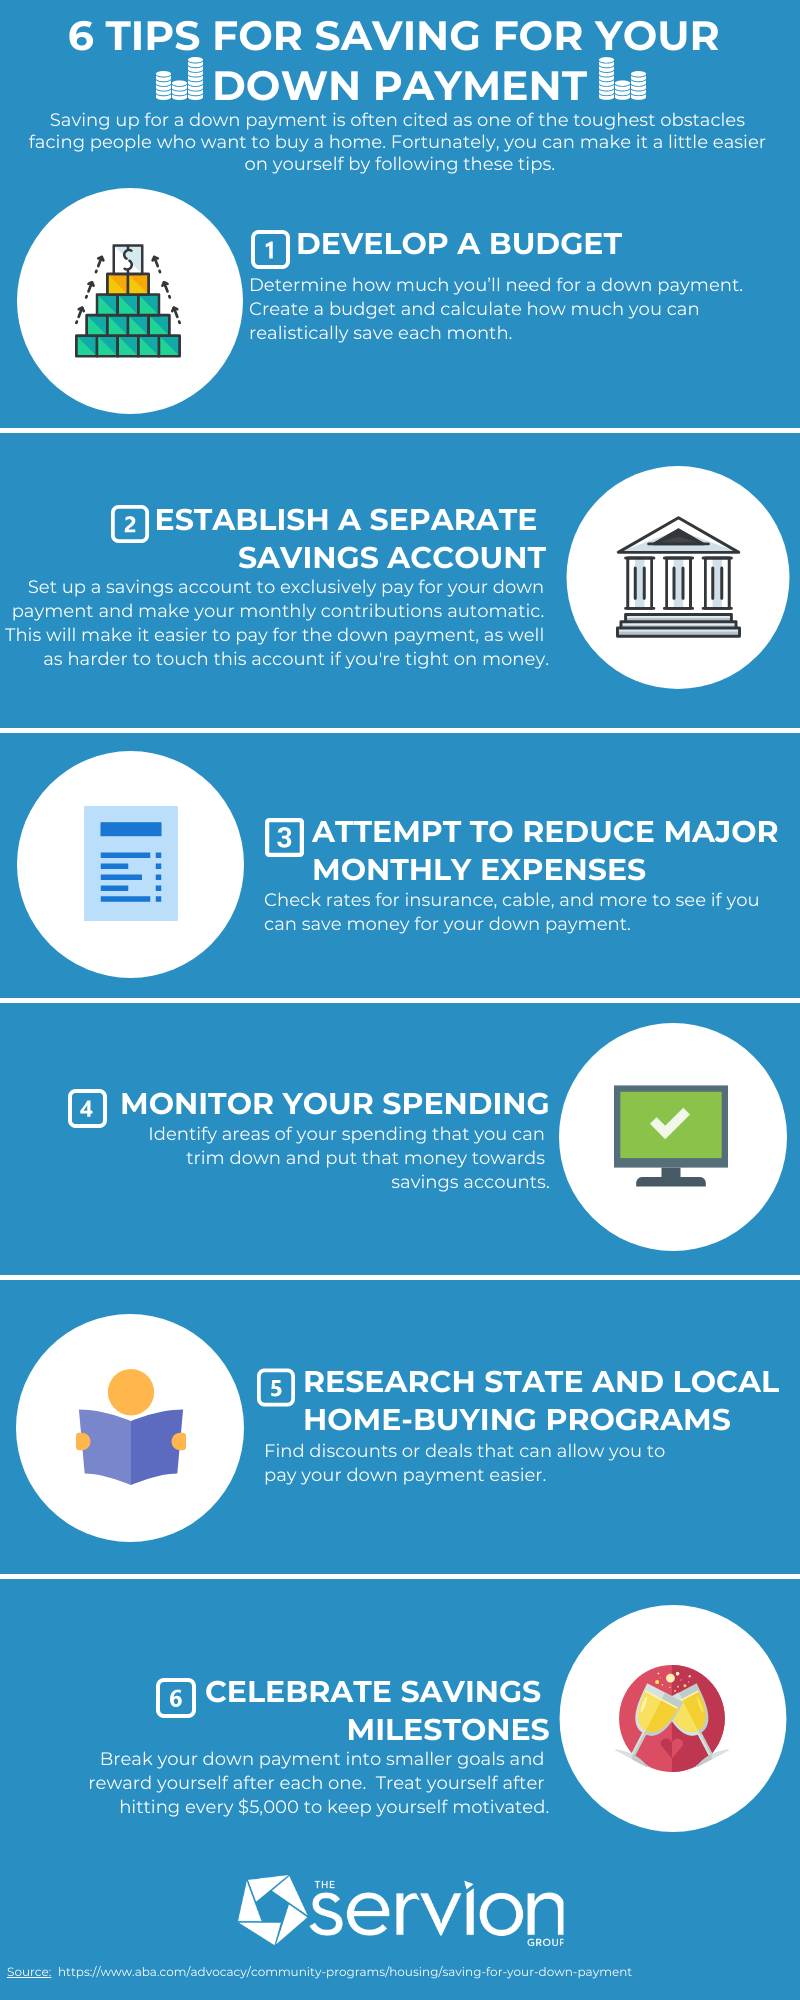 INFOGRAPHIC: 27 Tips For Saving for a Down Payment  The Servion Group